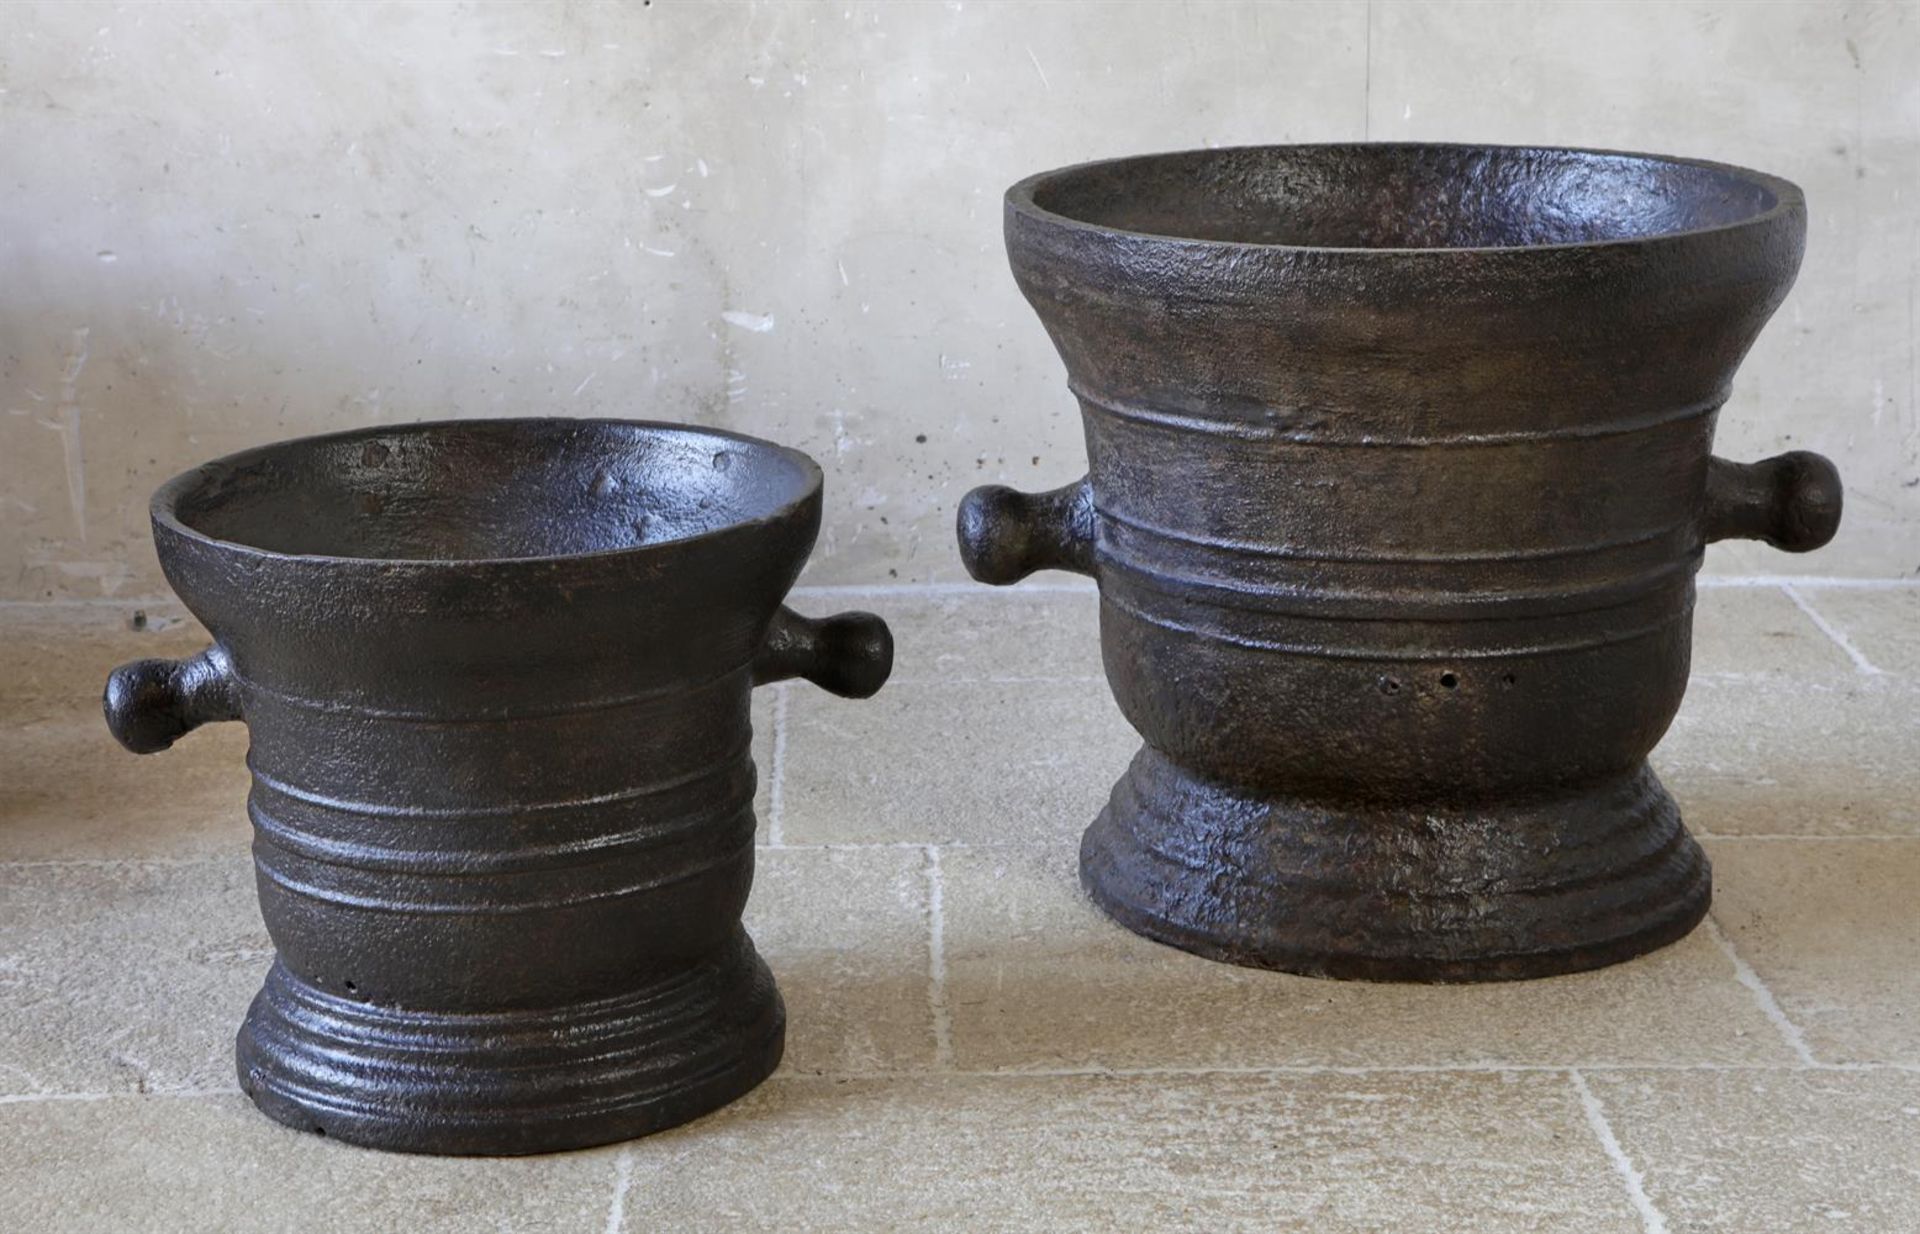 ‡ TWO SUBSTANTIAL CAST IRON MORTARS